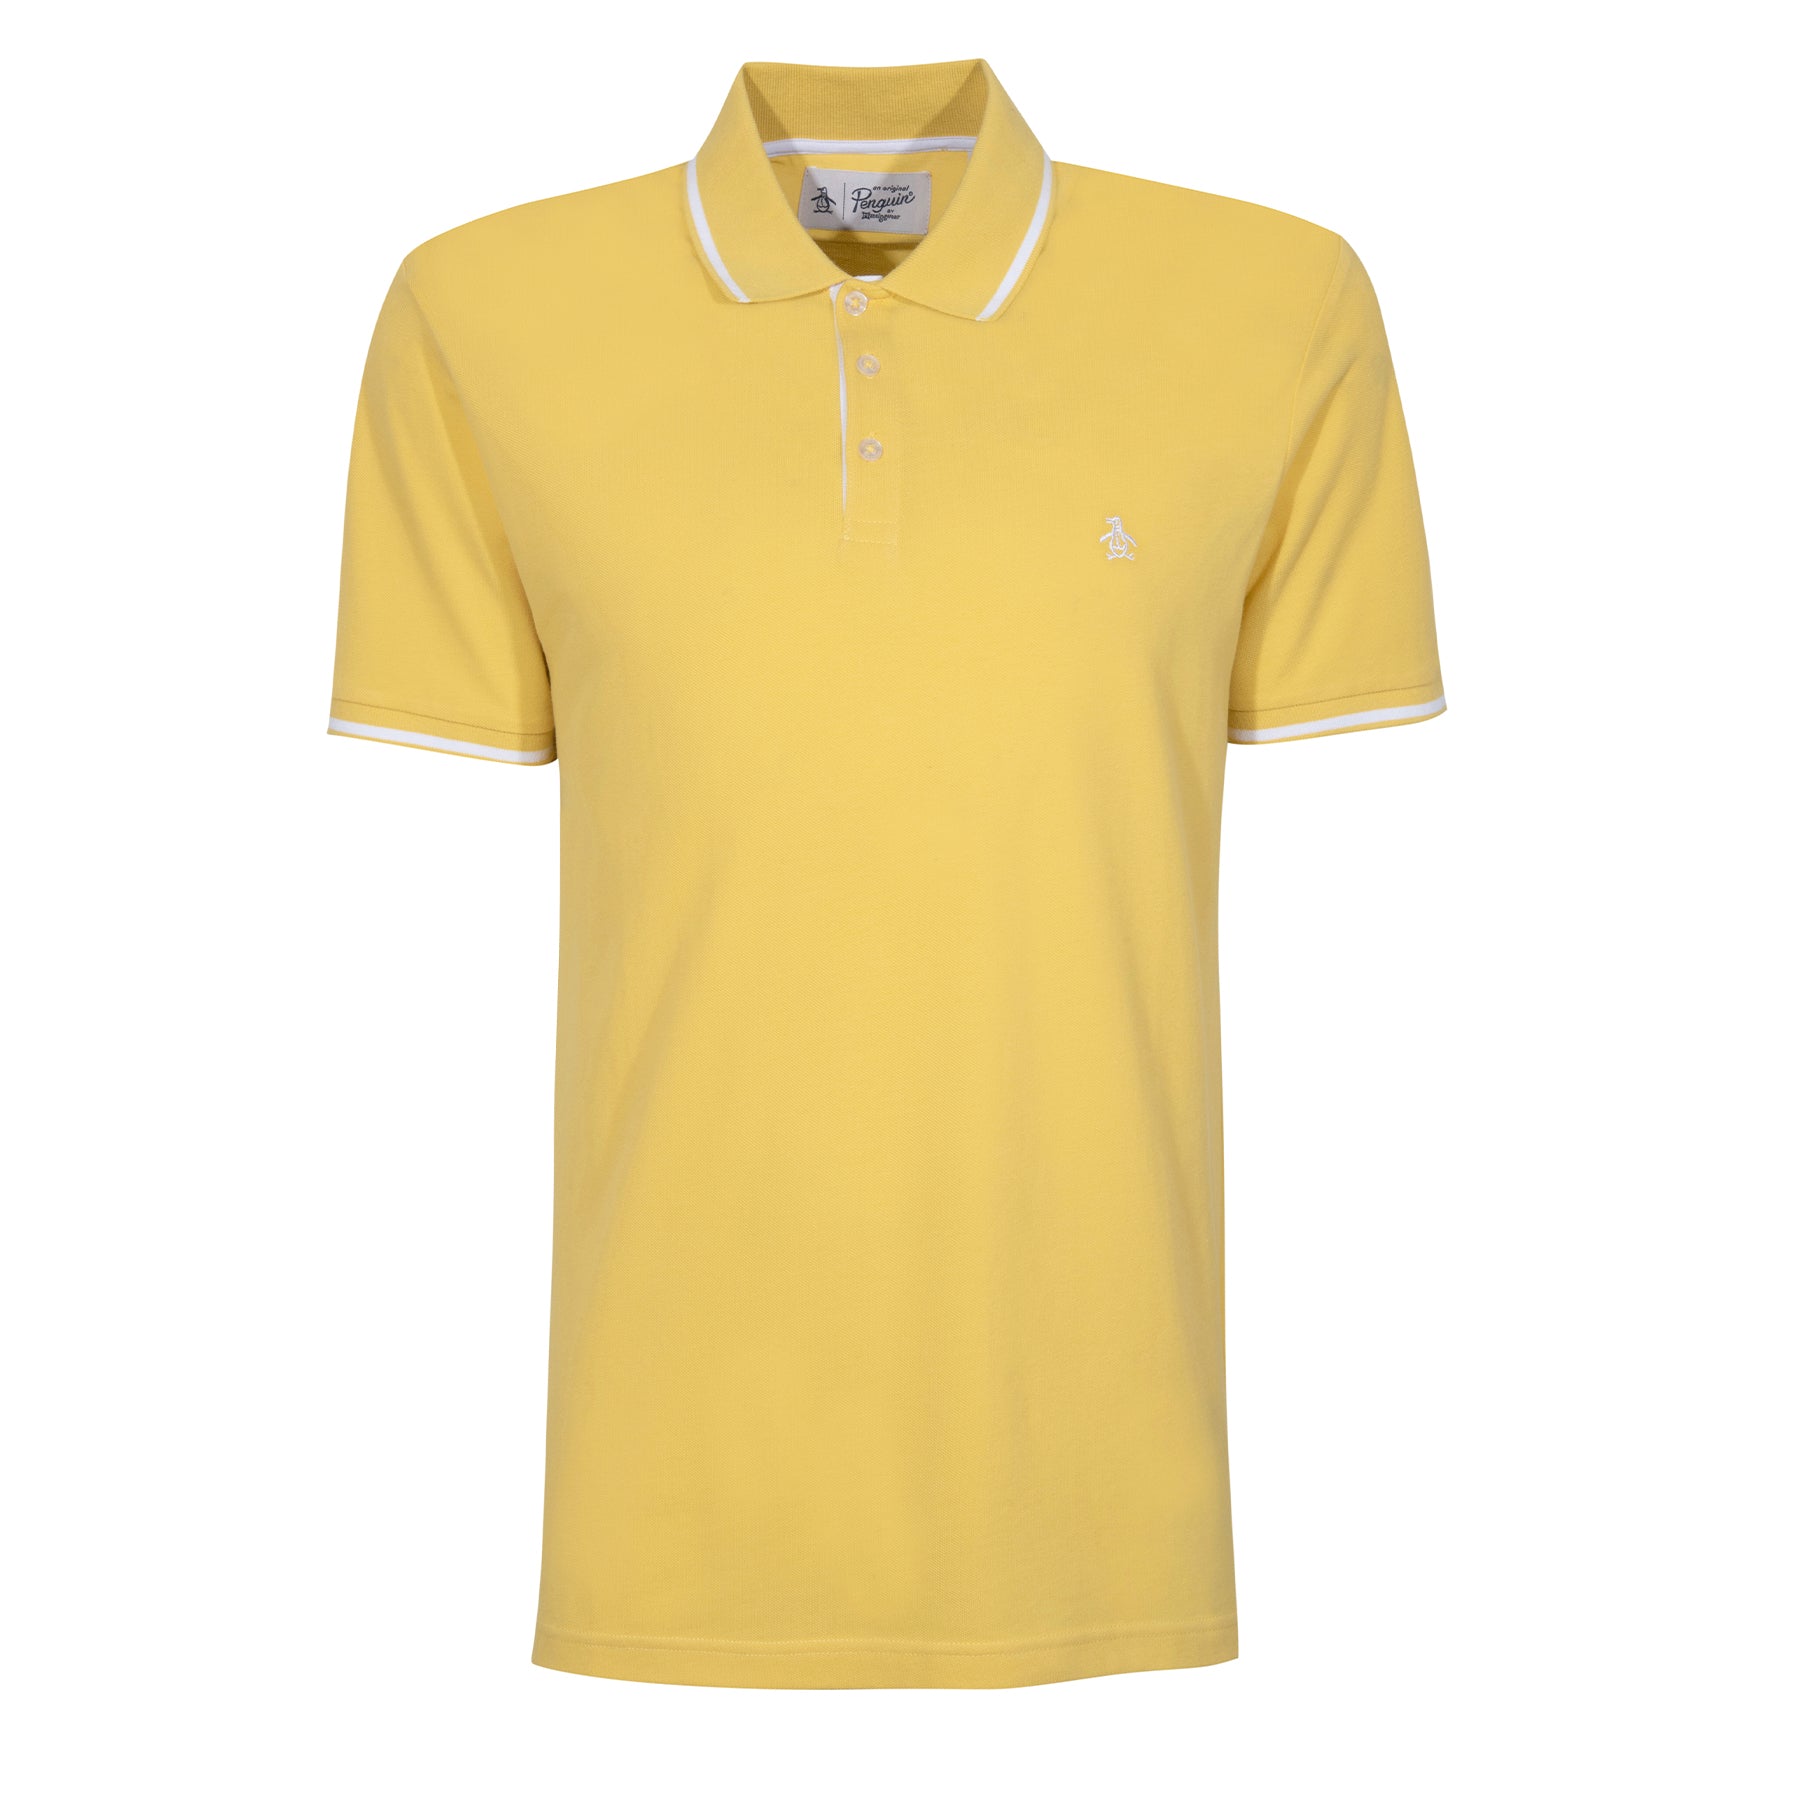 View Short Sleeve Tipped Pique Polo Shirt In Cream Gold Outlet information